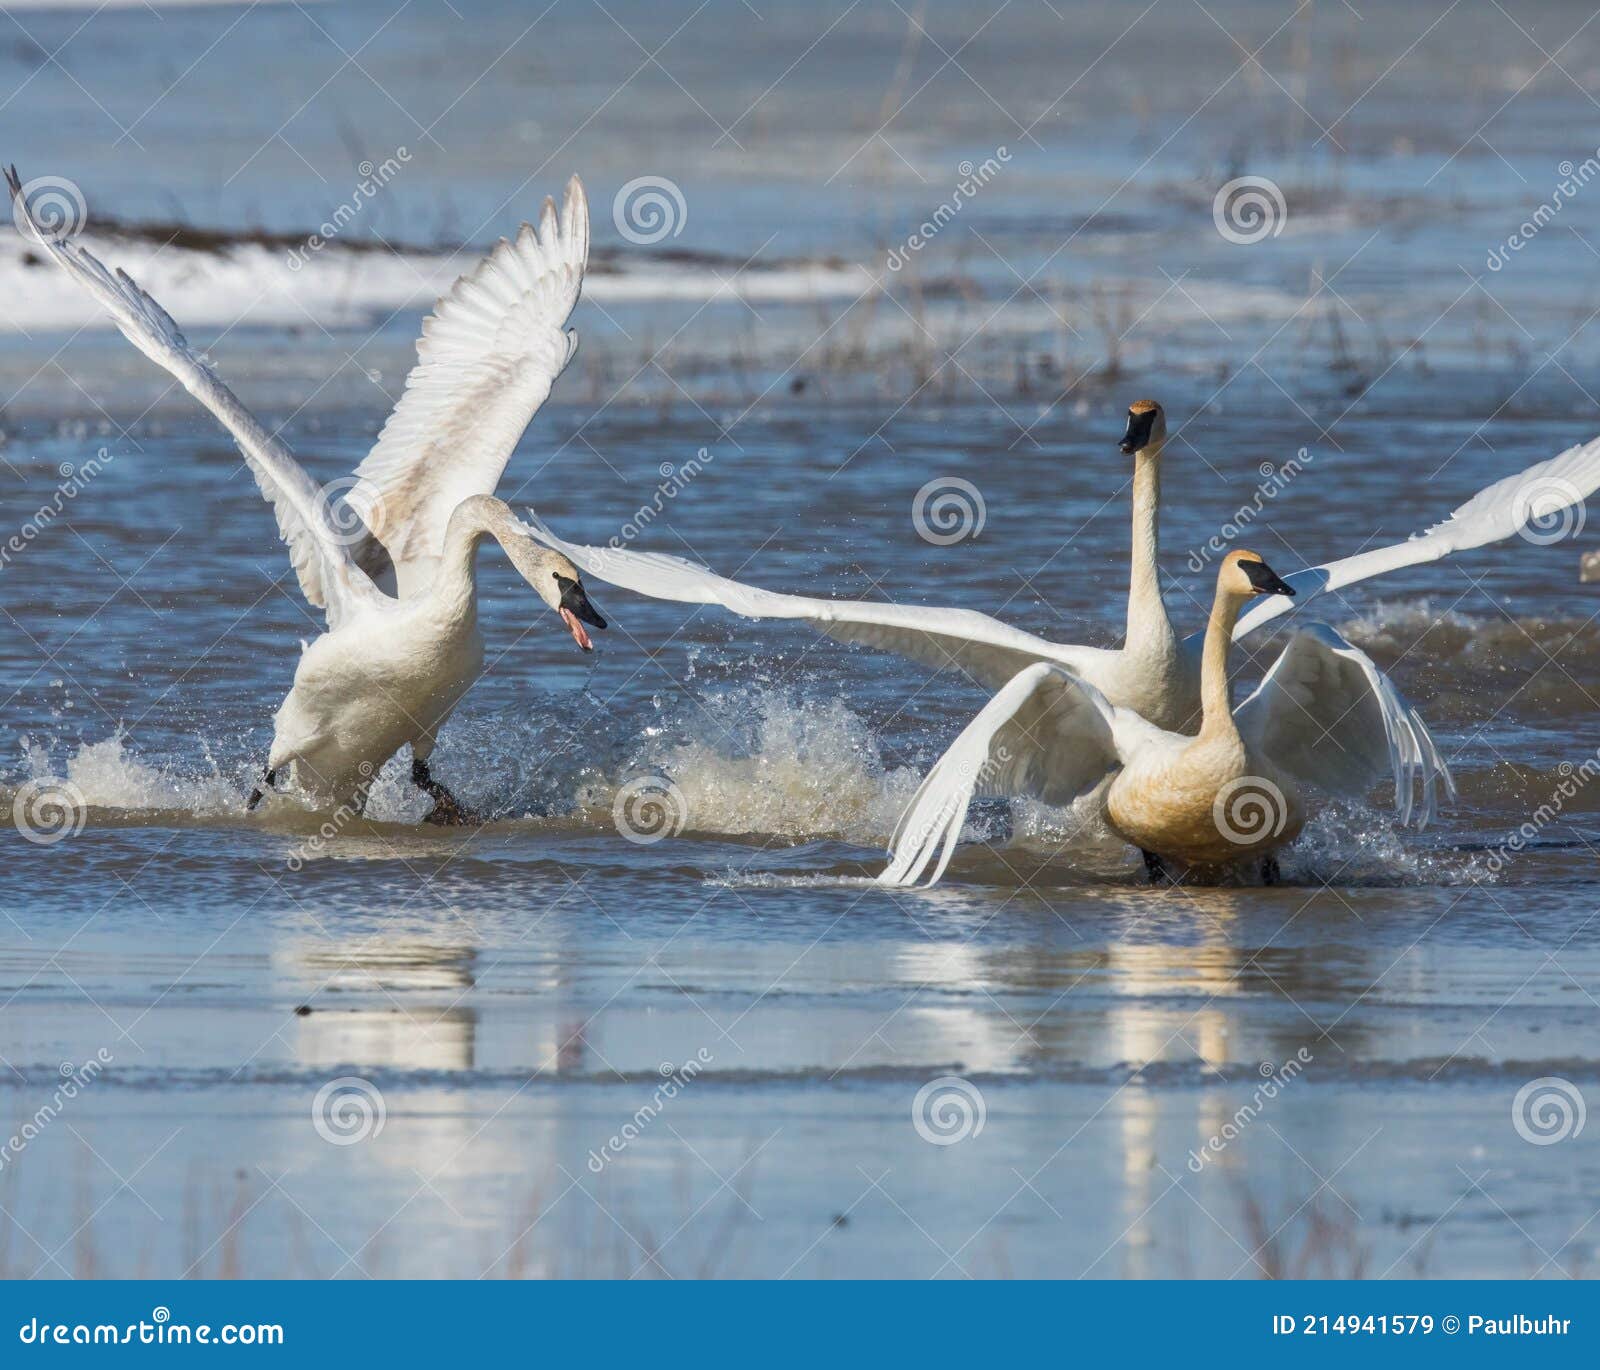 tundra swans leaping onto the ice